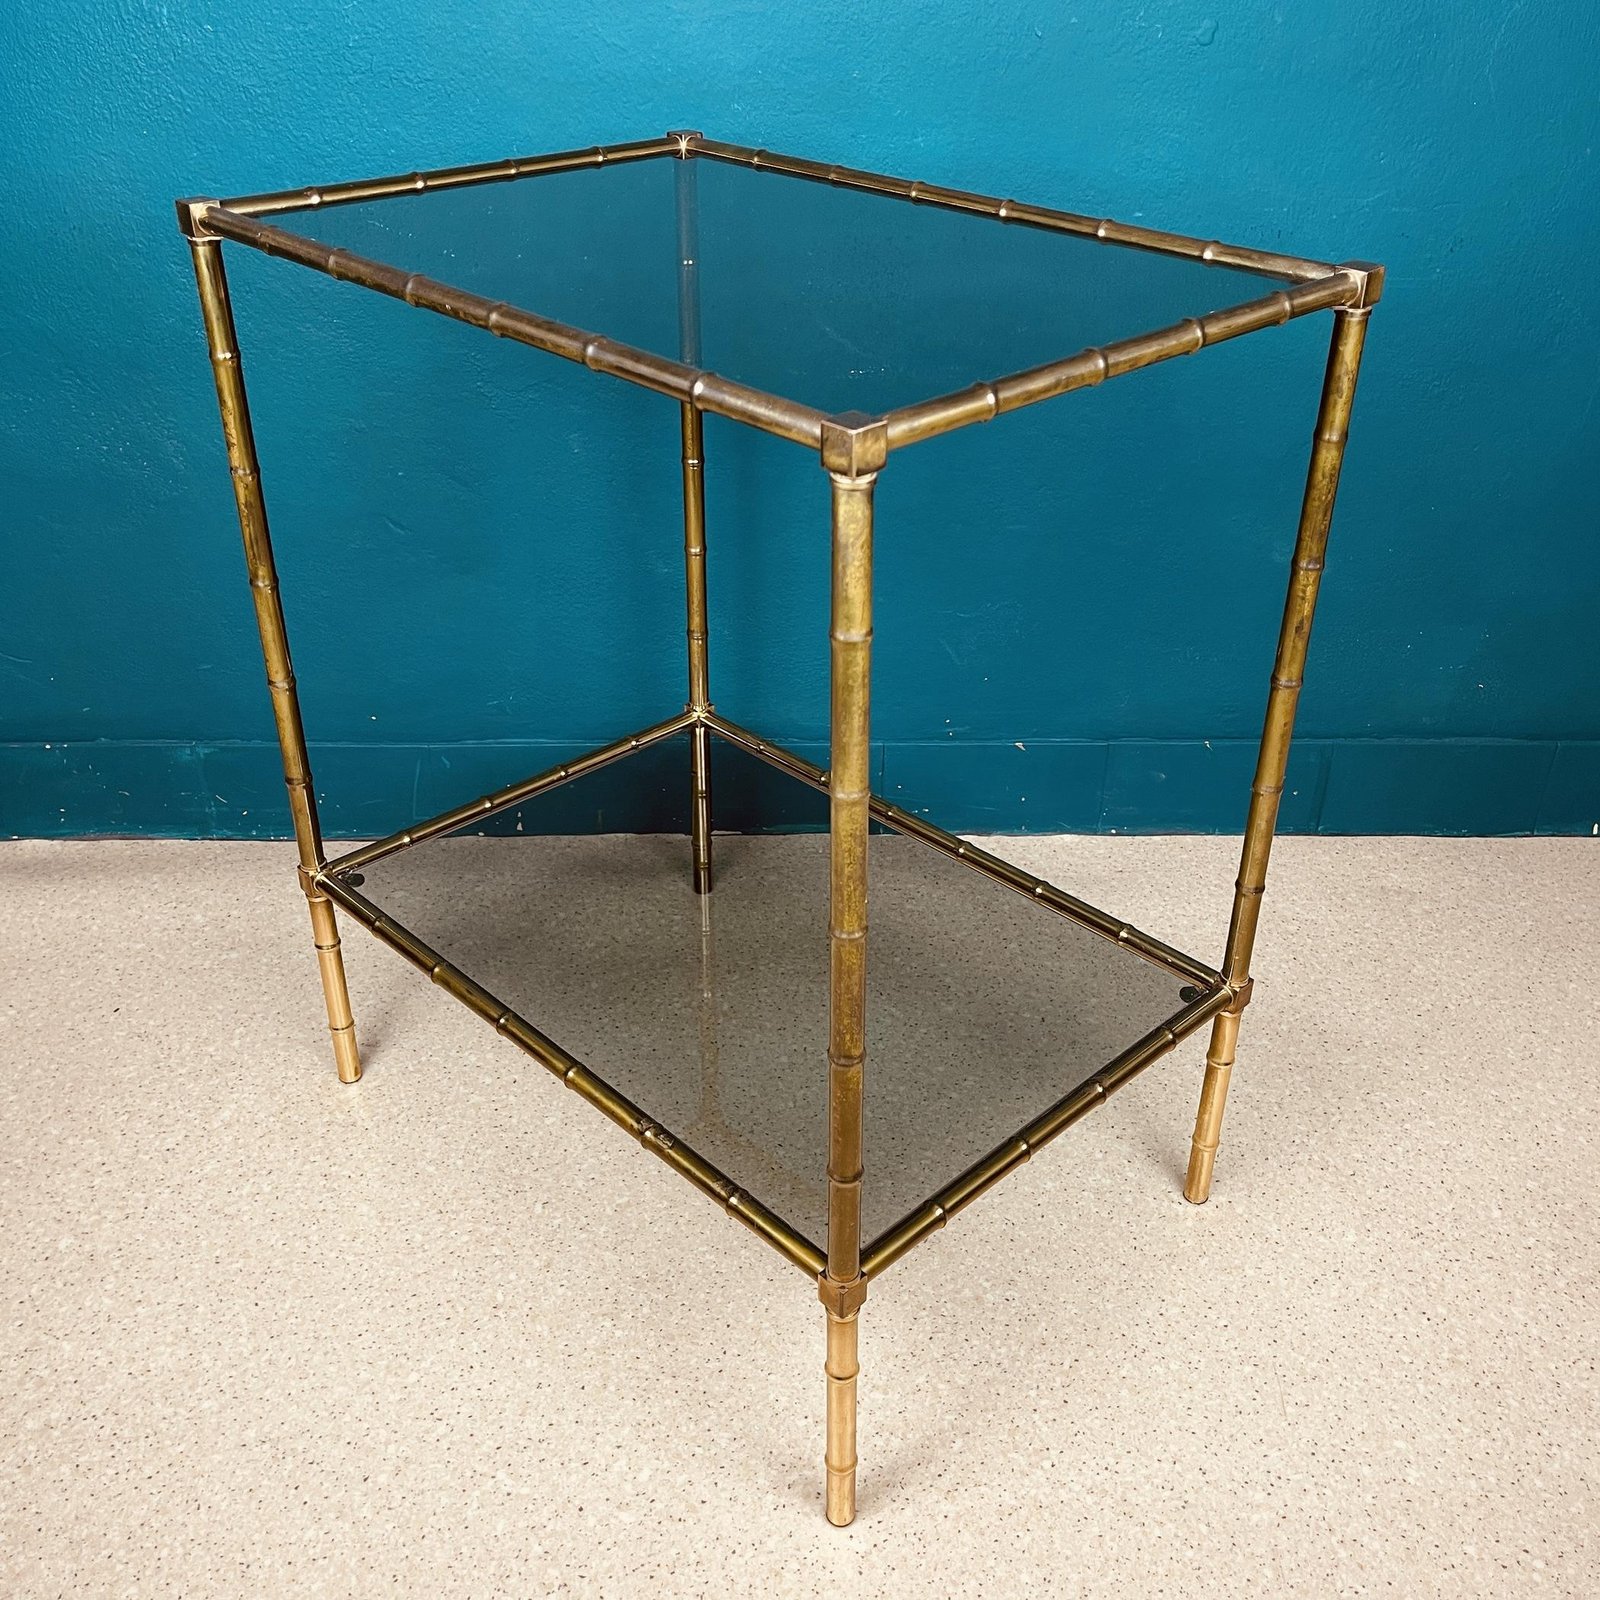 Vintage brass bamboo coffee table Italy '70s Retro decor Mid-century drink table Retro serving table Art deco Smoked Glass & Brass Table